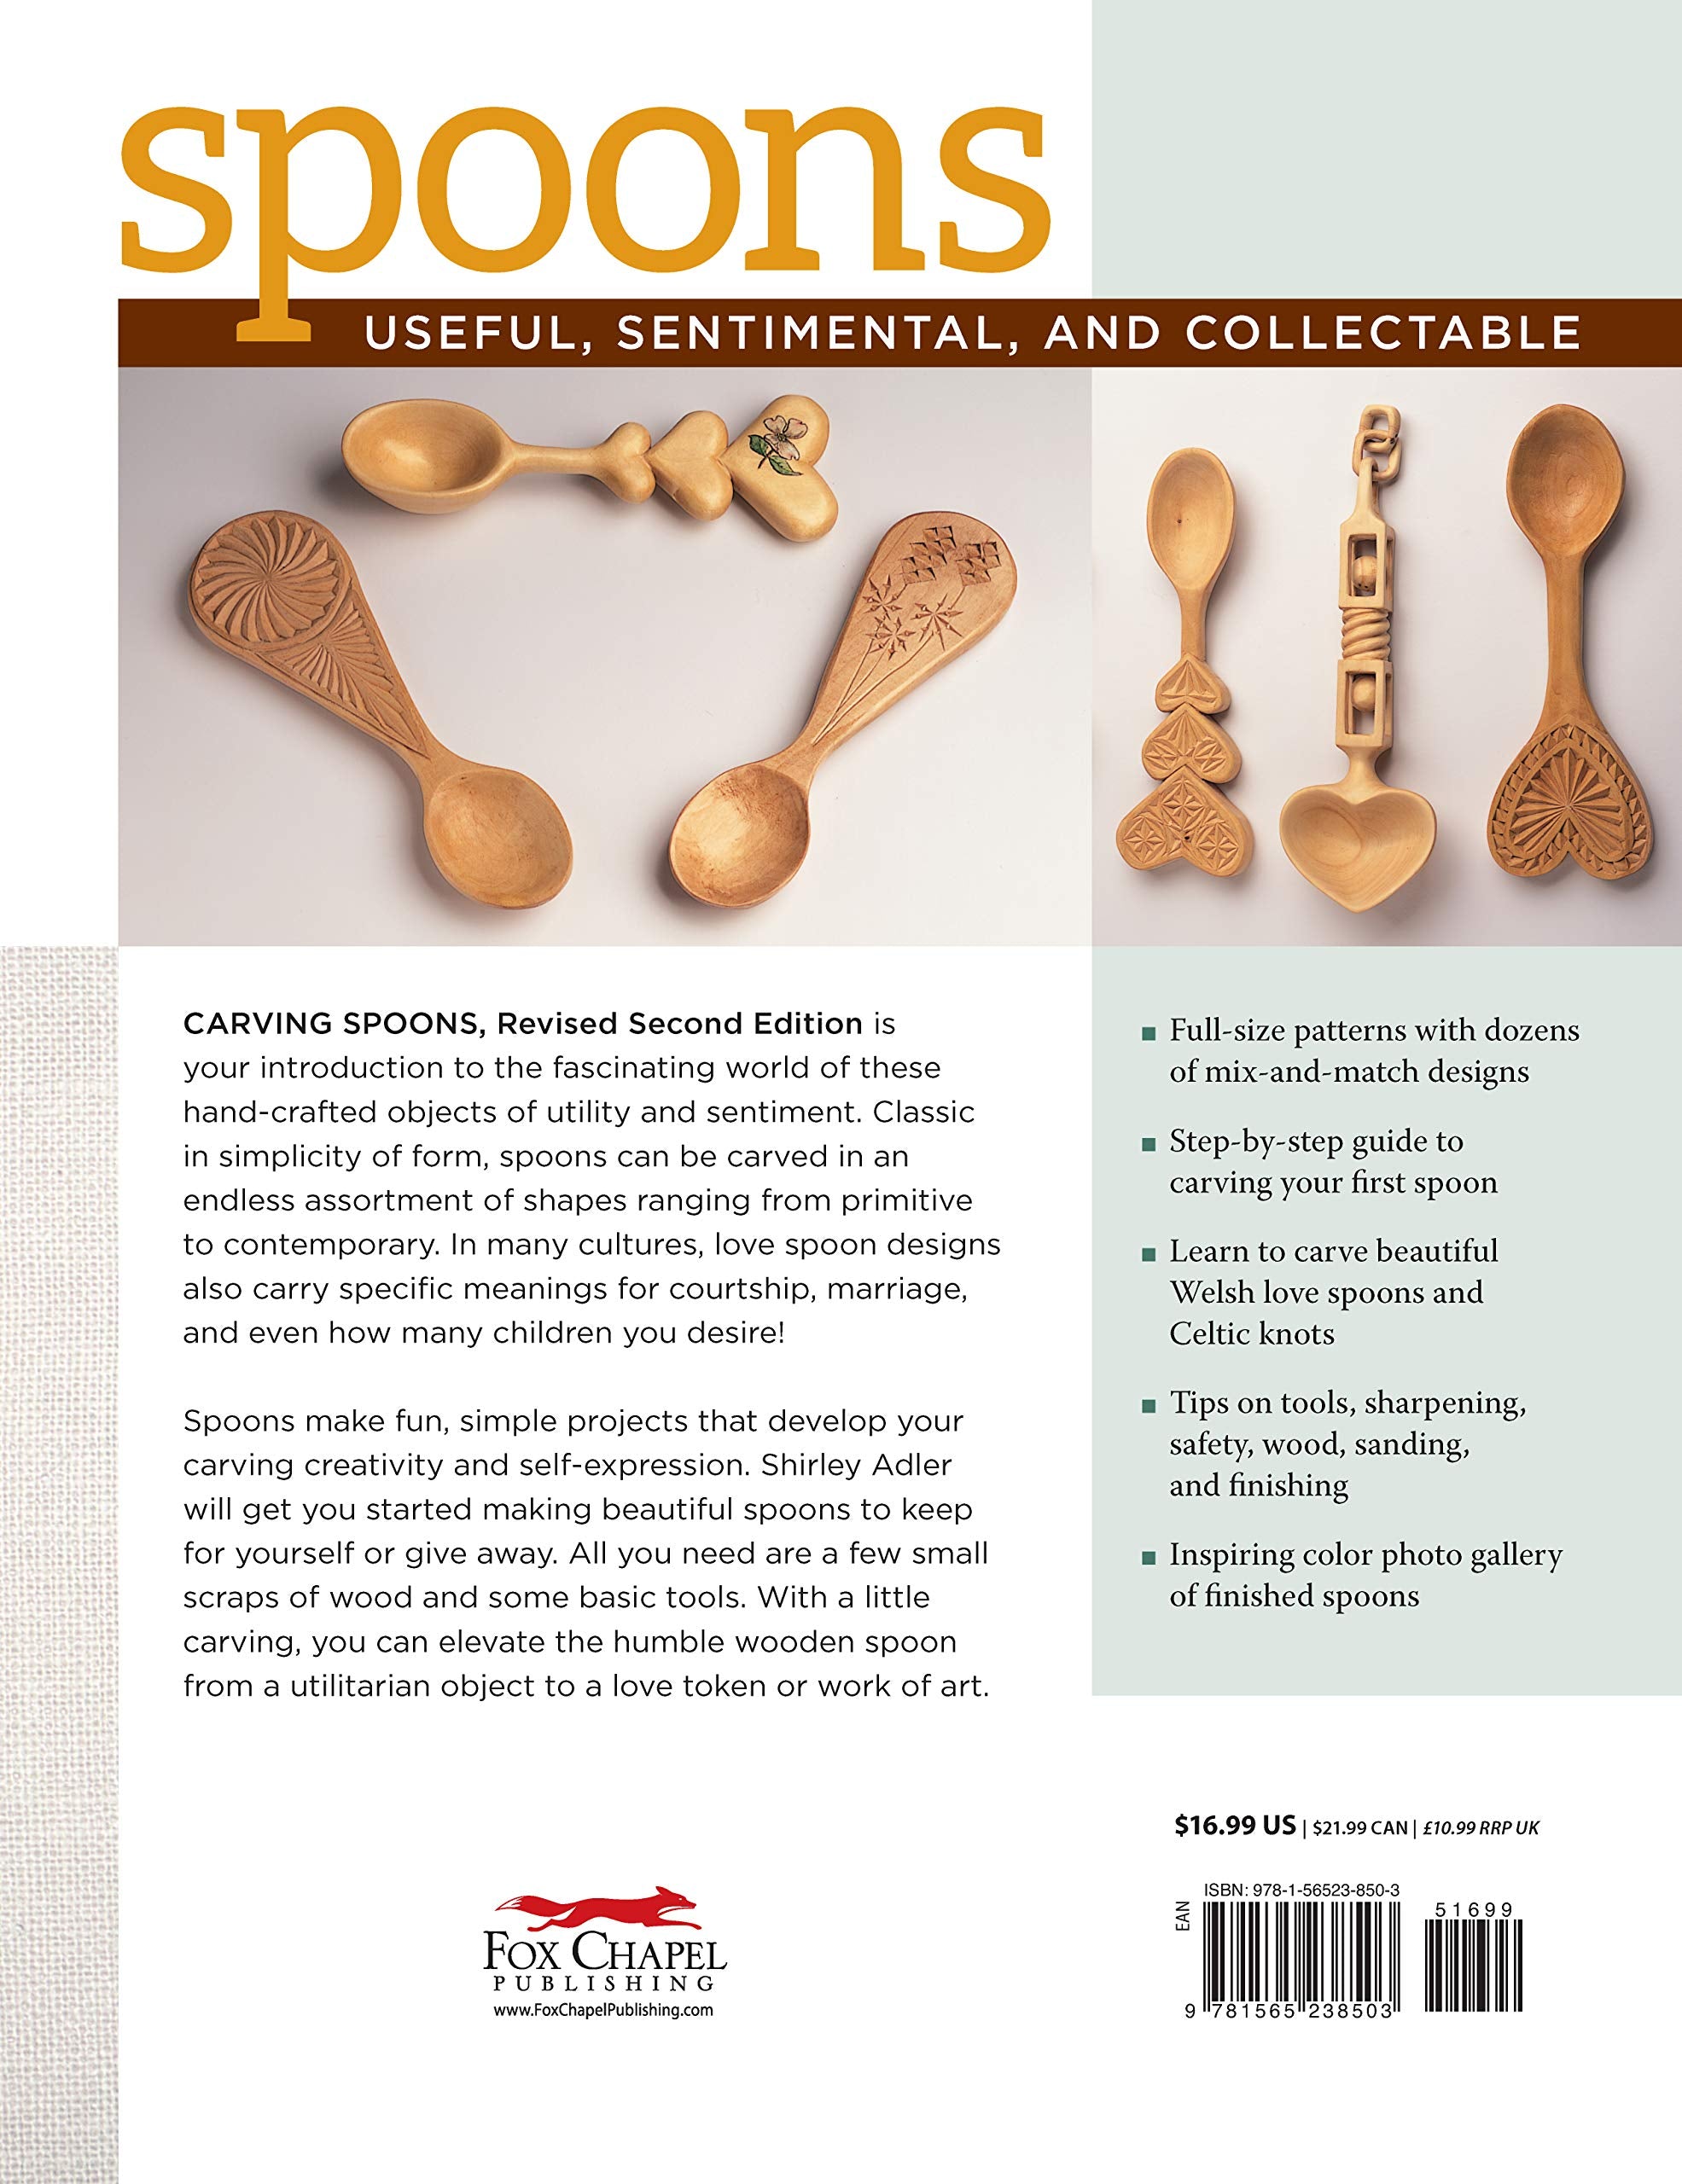 Carving Spoons, Revised Second Edition: Welsh Love Spoons, Celtic Knots, and Contemporary Favorites (Fox Chapel Publishing) 45 Full-Size Patterns & Step-by-Step Photos to Carve Your First Wooden Spoon